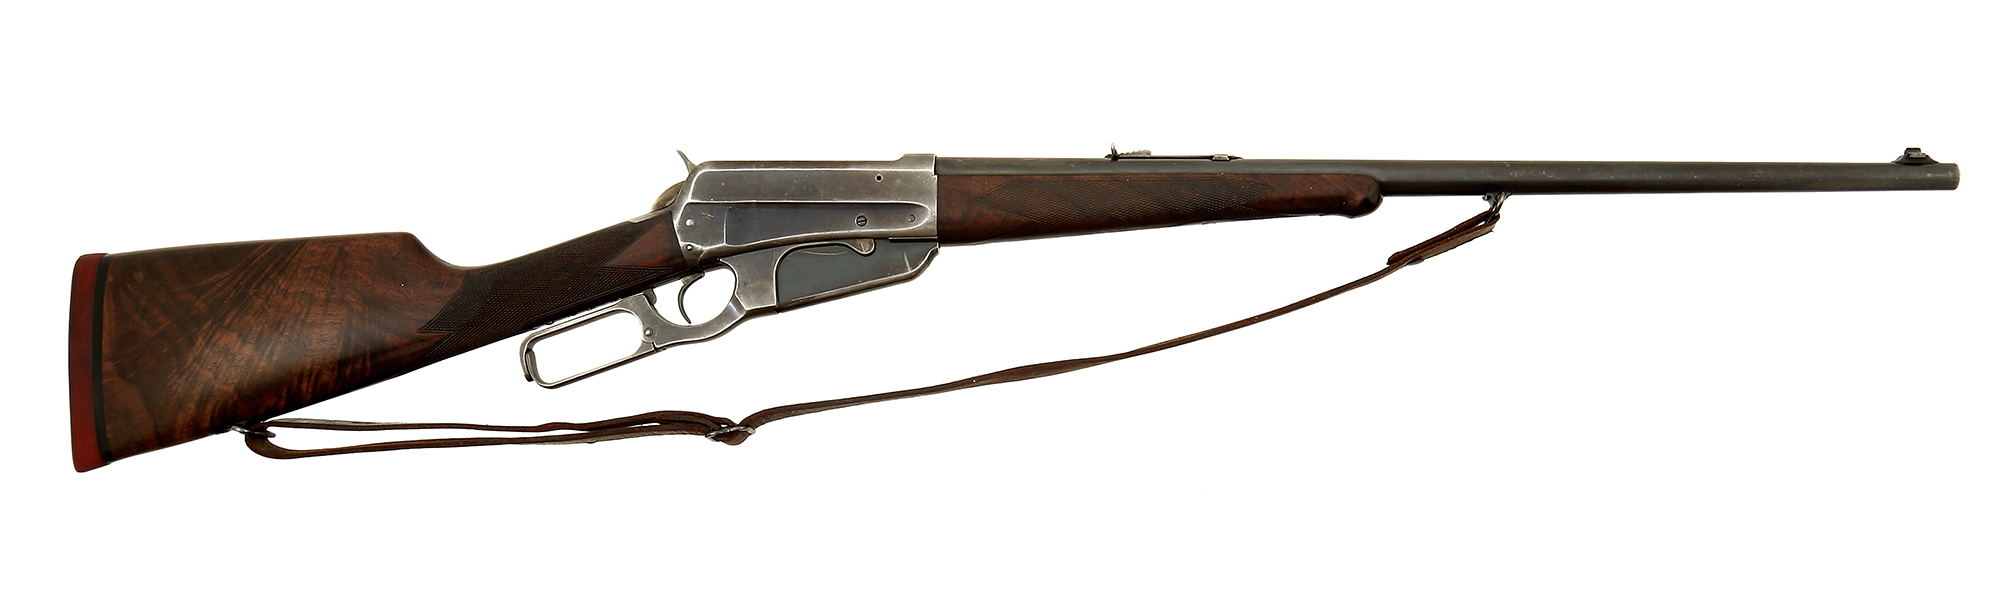 President Theodore Roosevelt’s Winchester Model 1895 Rifle